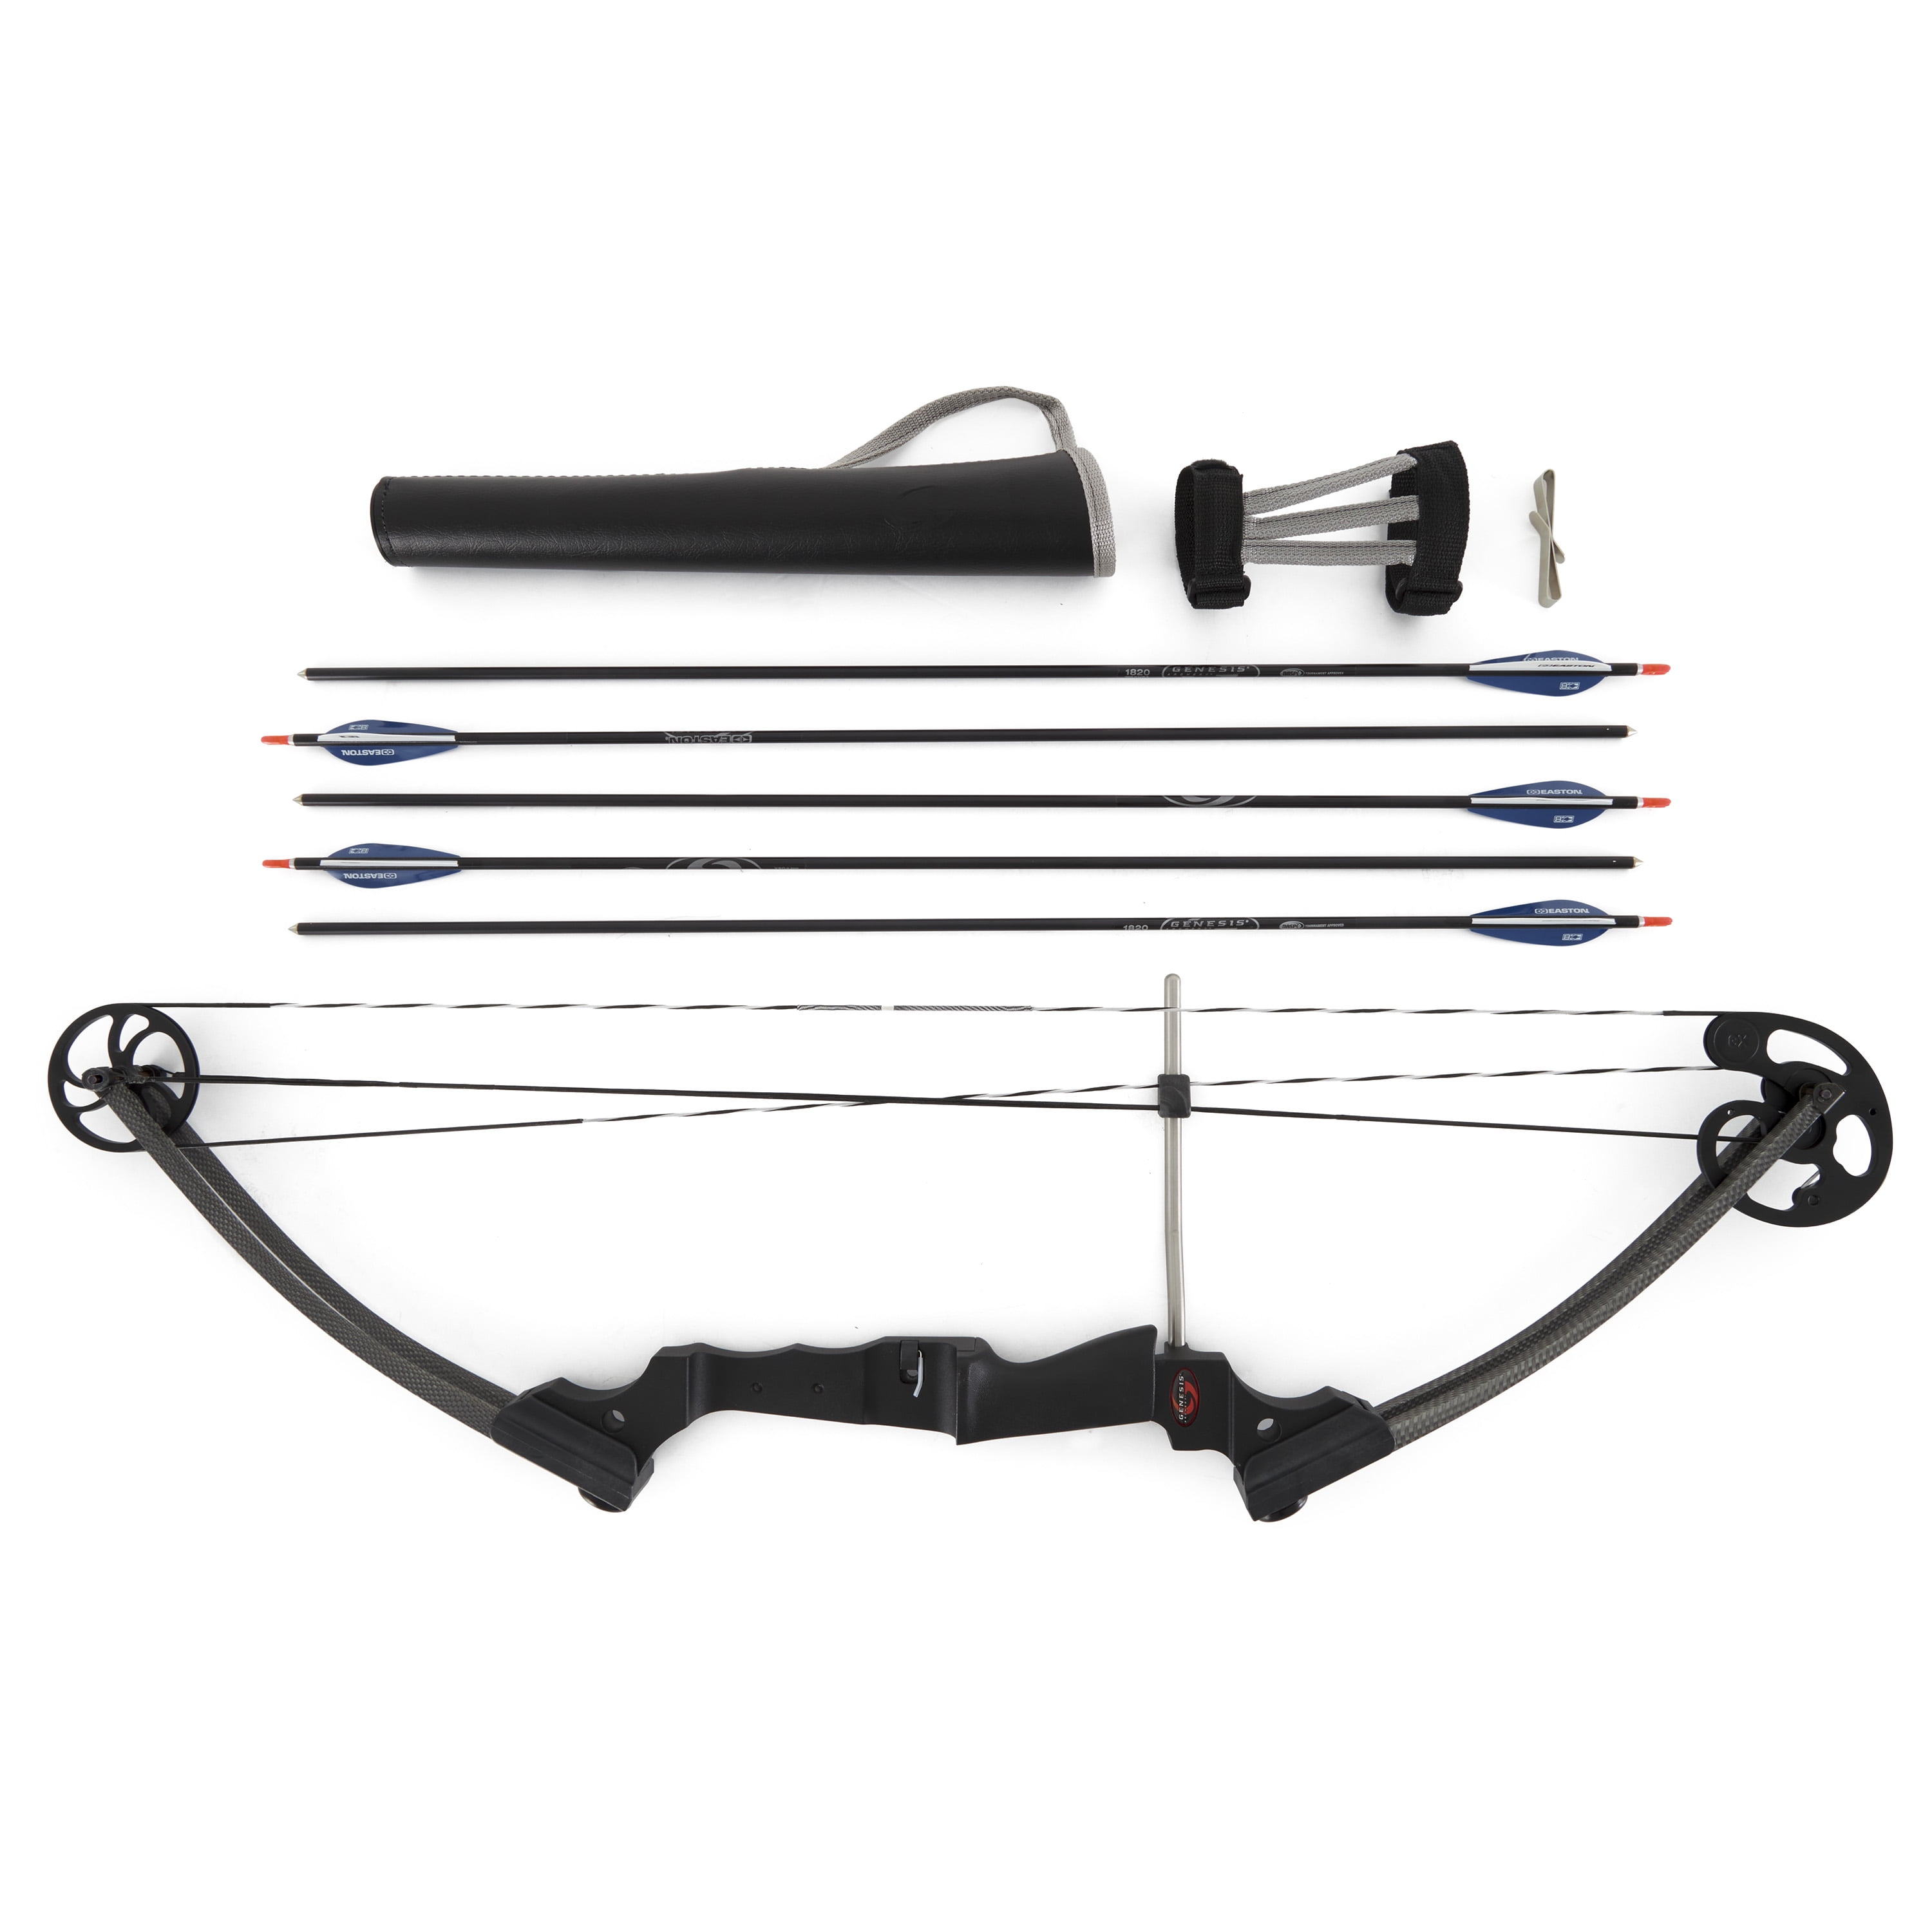 Details about   Hand-Held Archery Compound Bow Release for Men Women Outdoor Target Hunting 